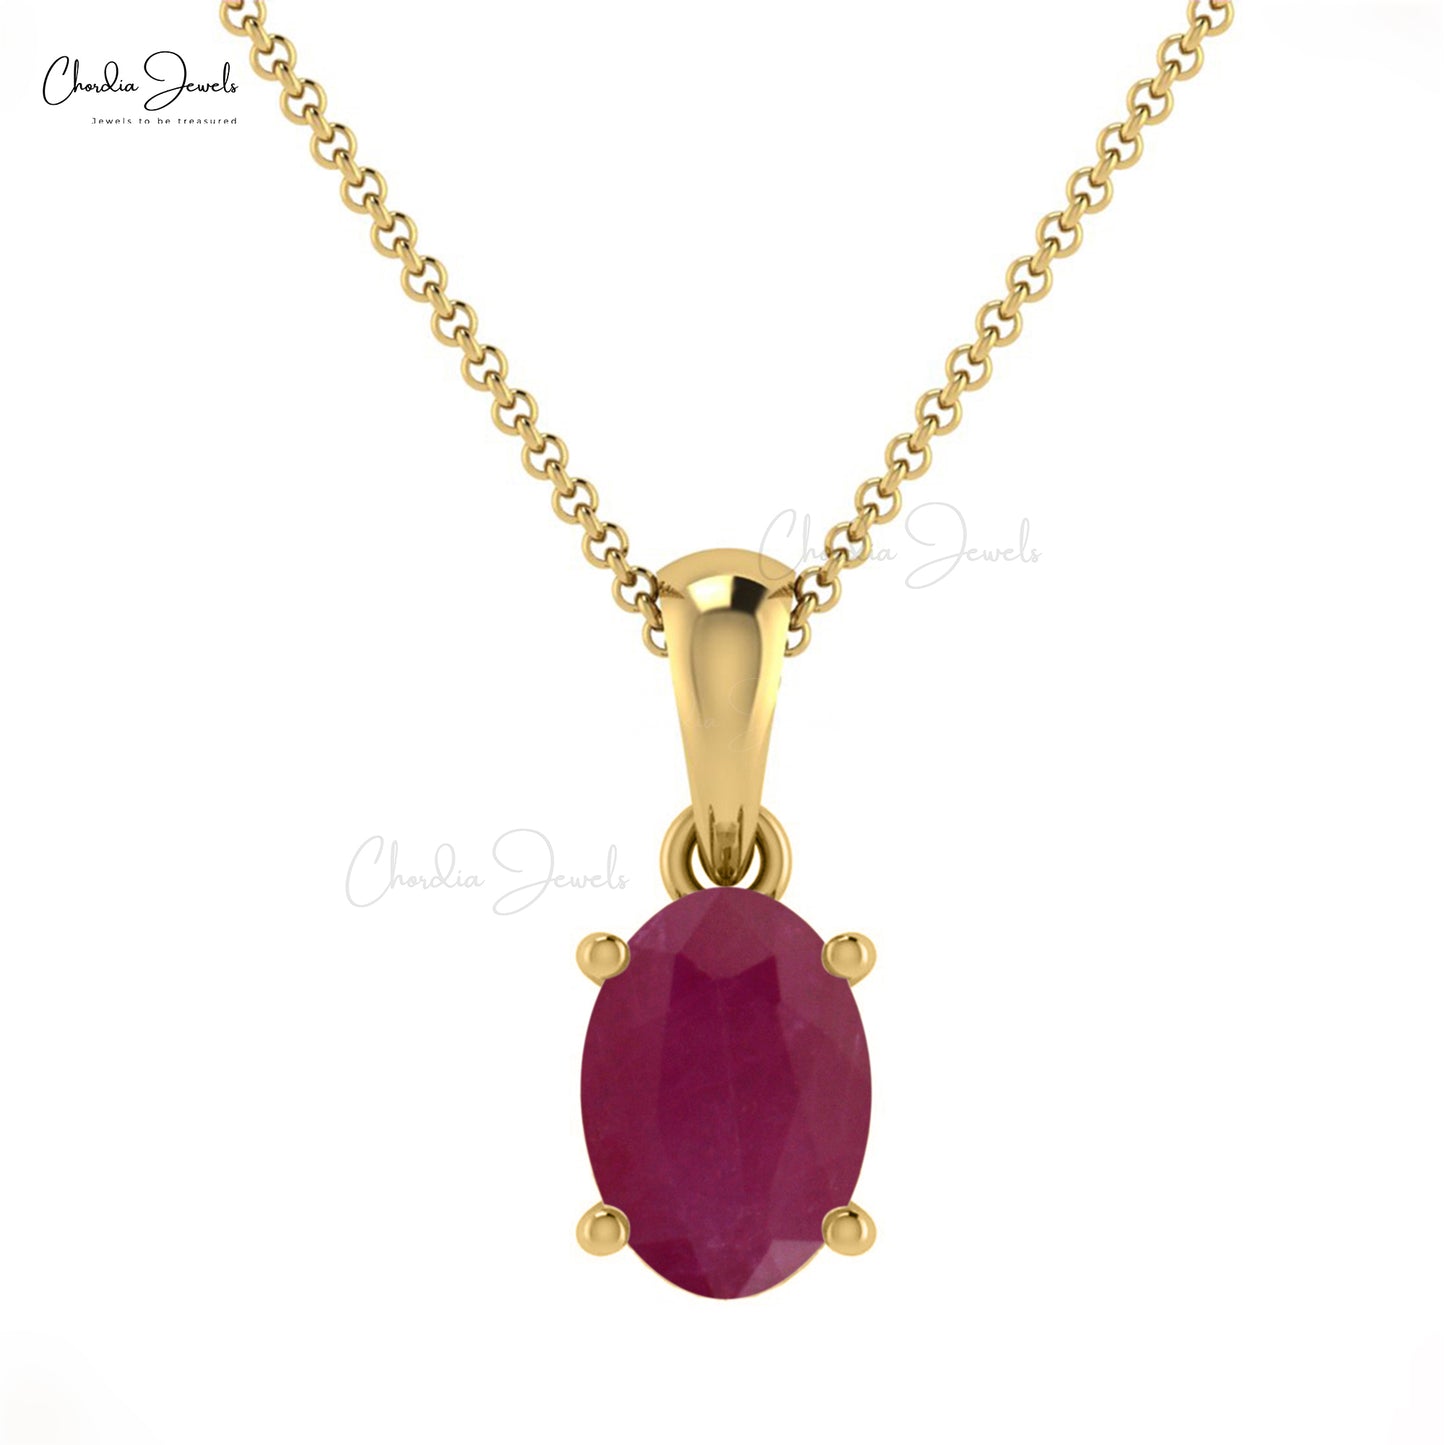 Stunning Ruby Gemstone Solitaire Pendant in 14k Solid Gold 6x4mm July Birthstone Jewelry